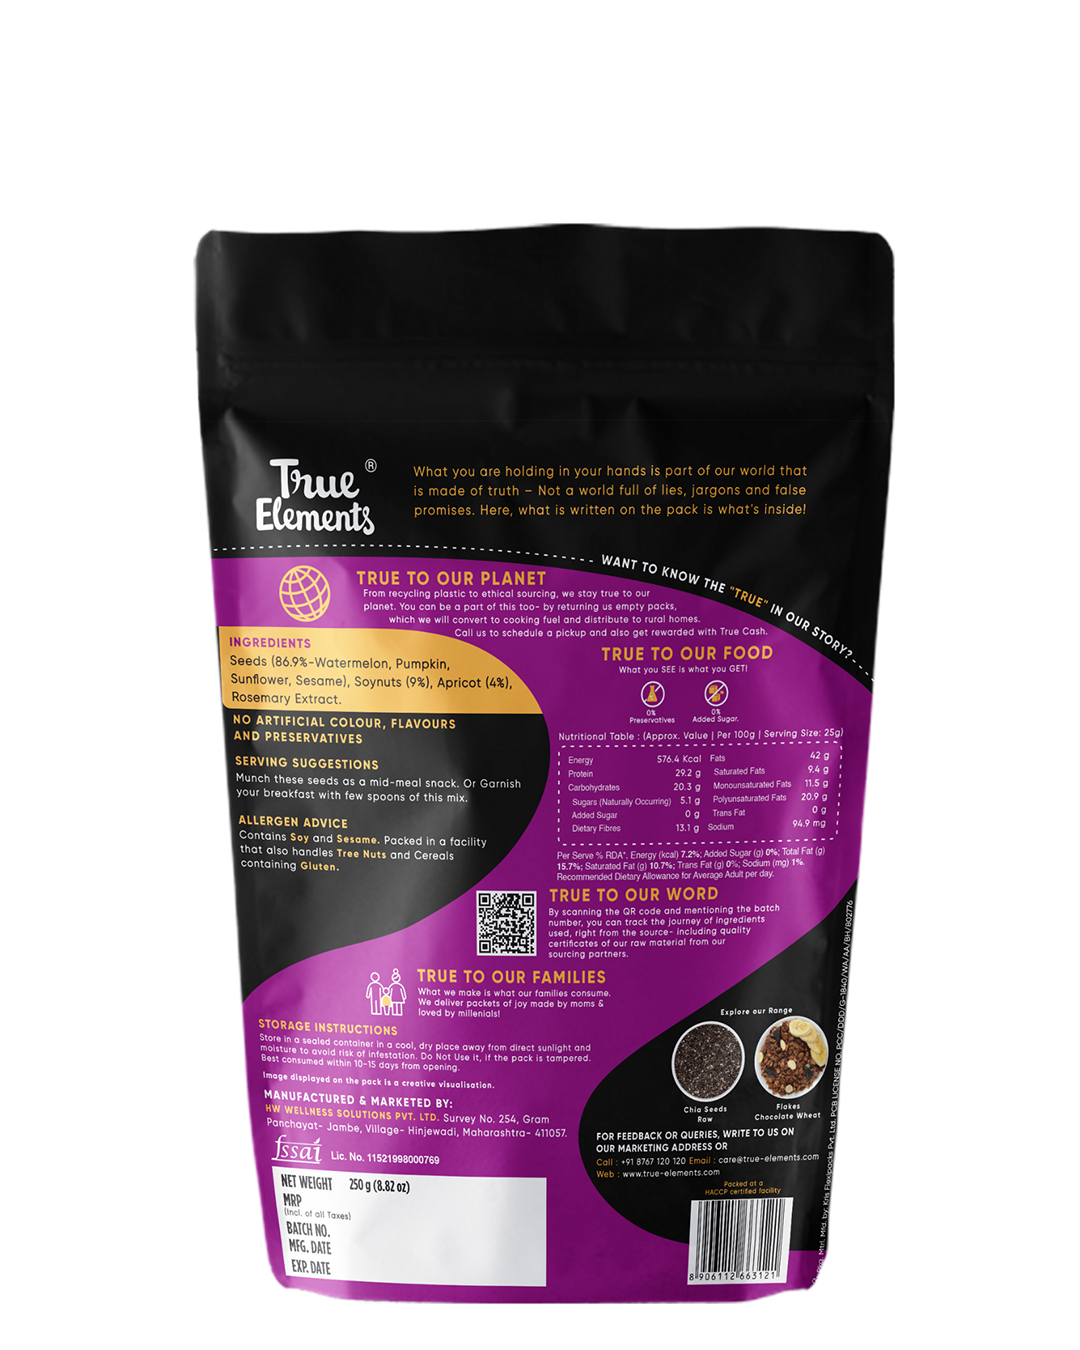 True elements multivitamin mix 250g pack ingredients and nutrients